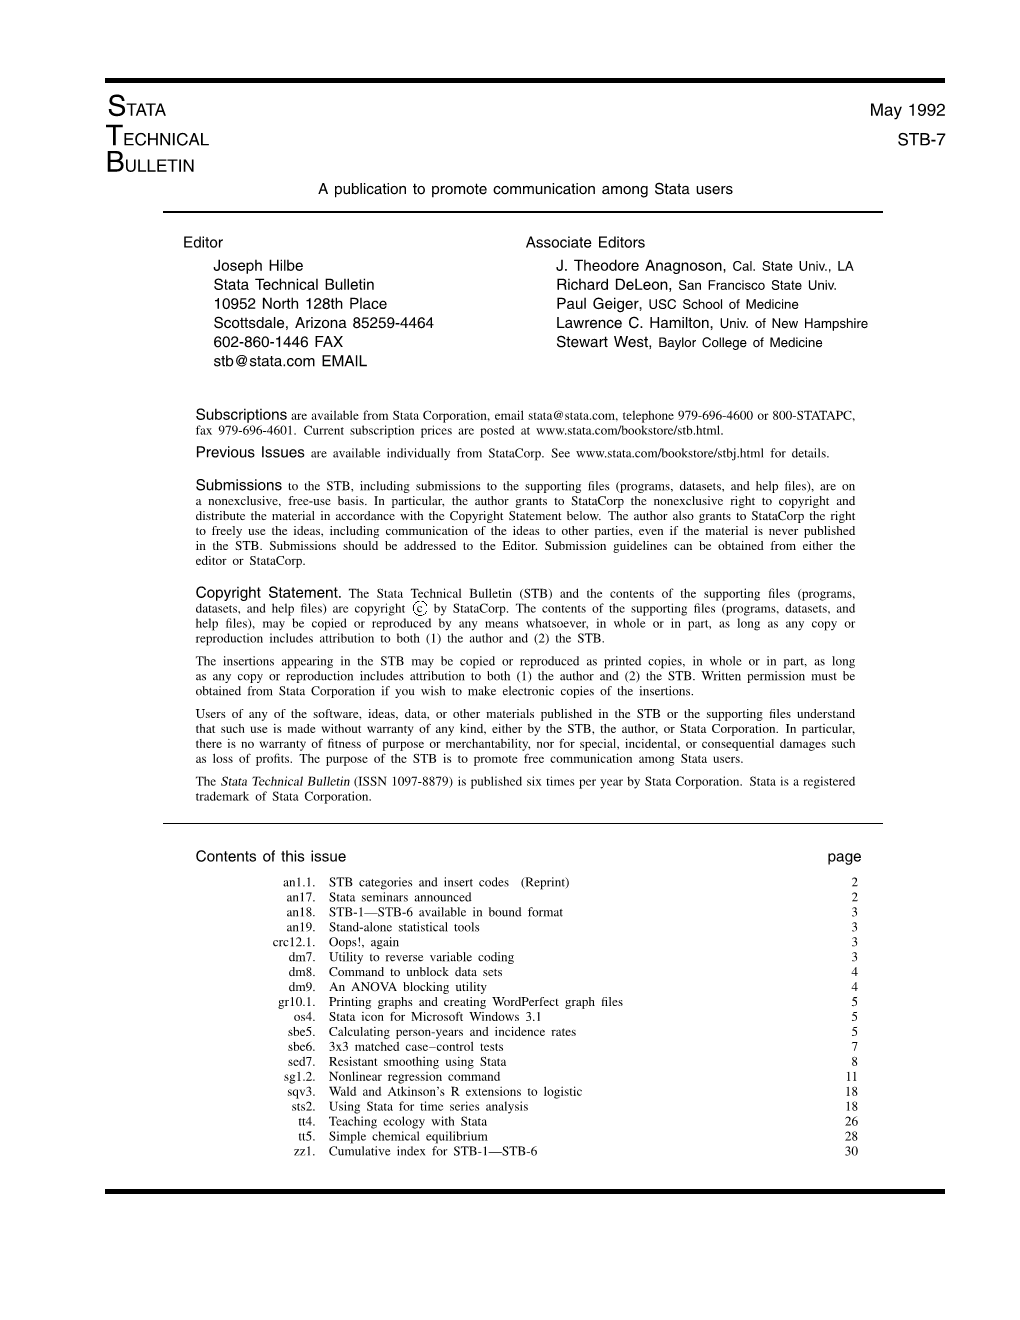 STATA May 1992 TECHNICAL STB-7 BULLETIN a Publication to Promote Communication Among Stata Users